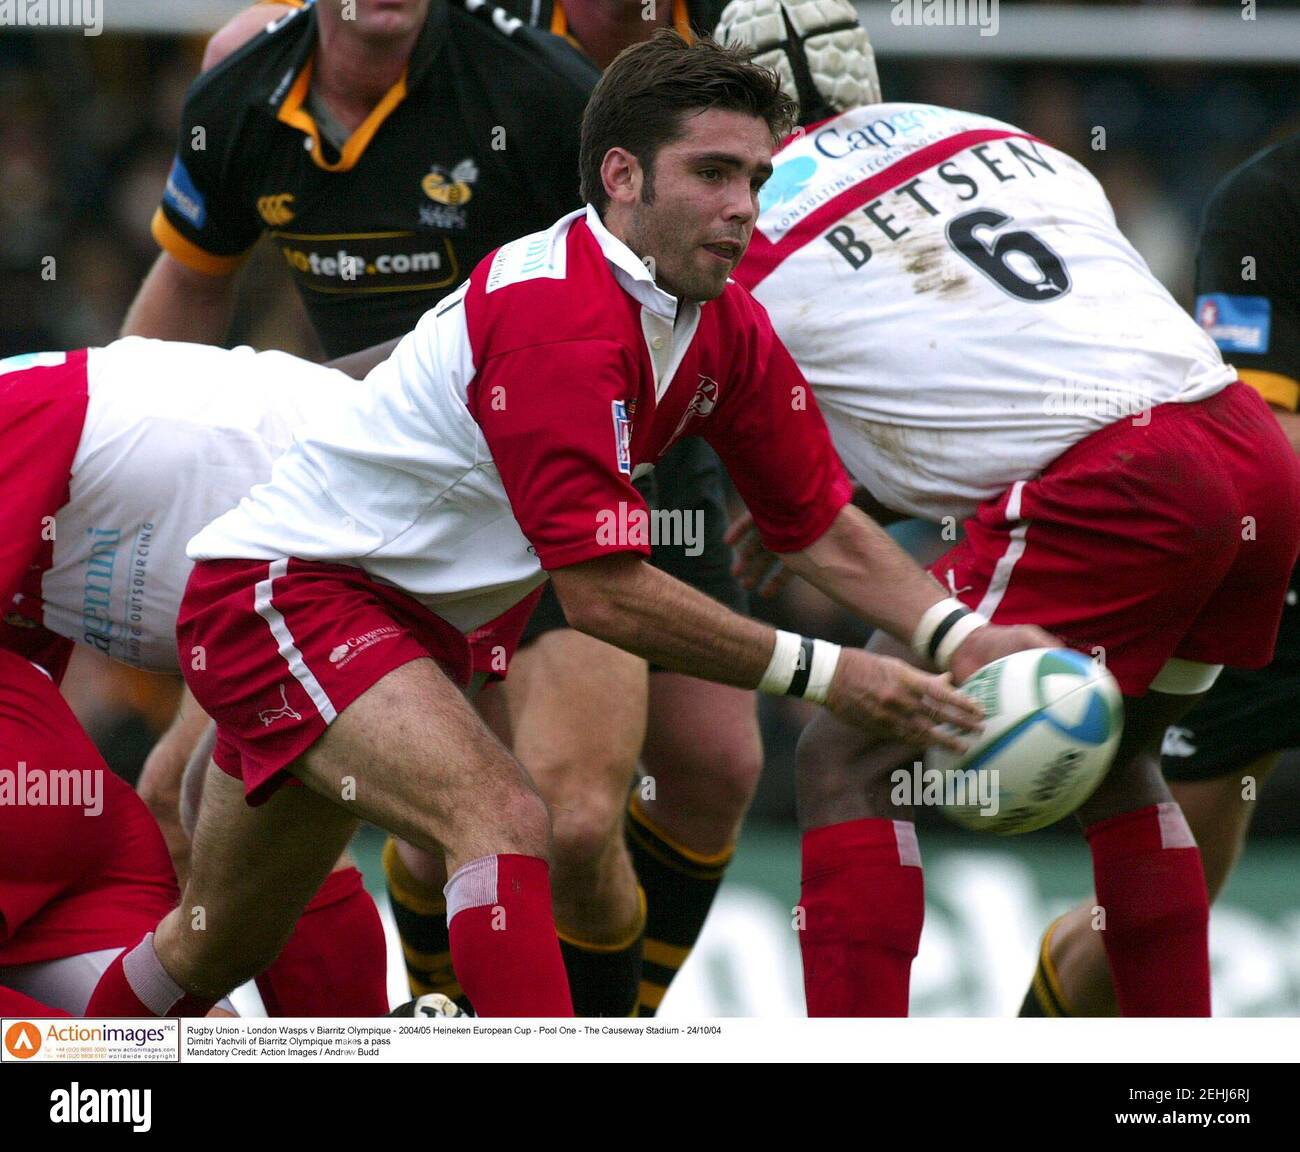 Rugby Union - London Wasps v Biarritz Olympique - Heineken European Cup 04/05 - Pool One - The Causeway Stadium - 24/10/04  Dimitri Yachvili of Biarritz Olympique makes a pass  Mandatory Credit: Action Images / Andrew Budd Stock Photo